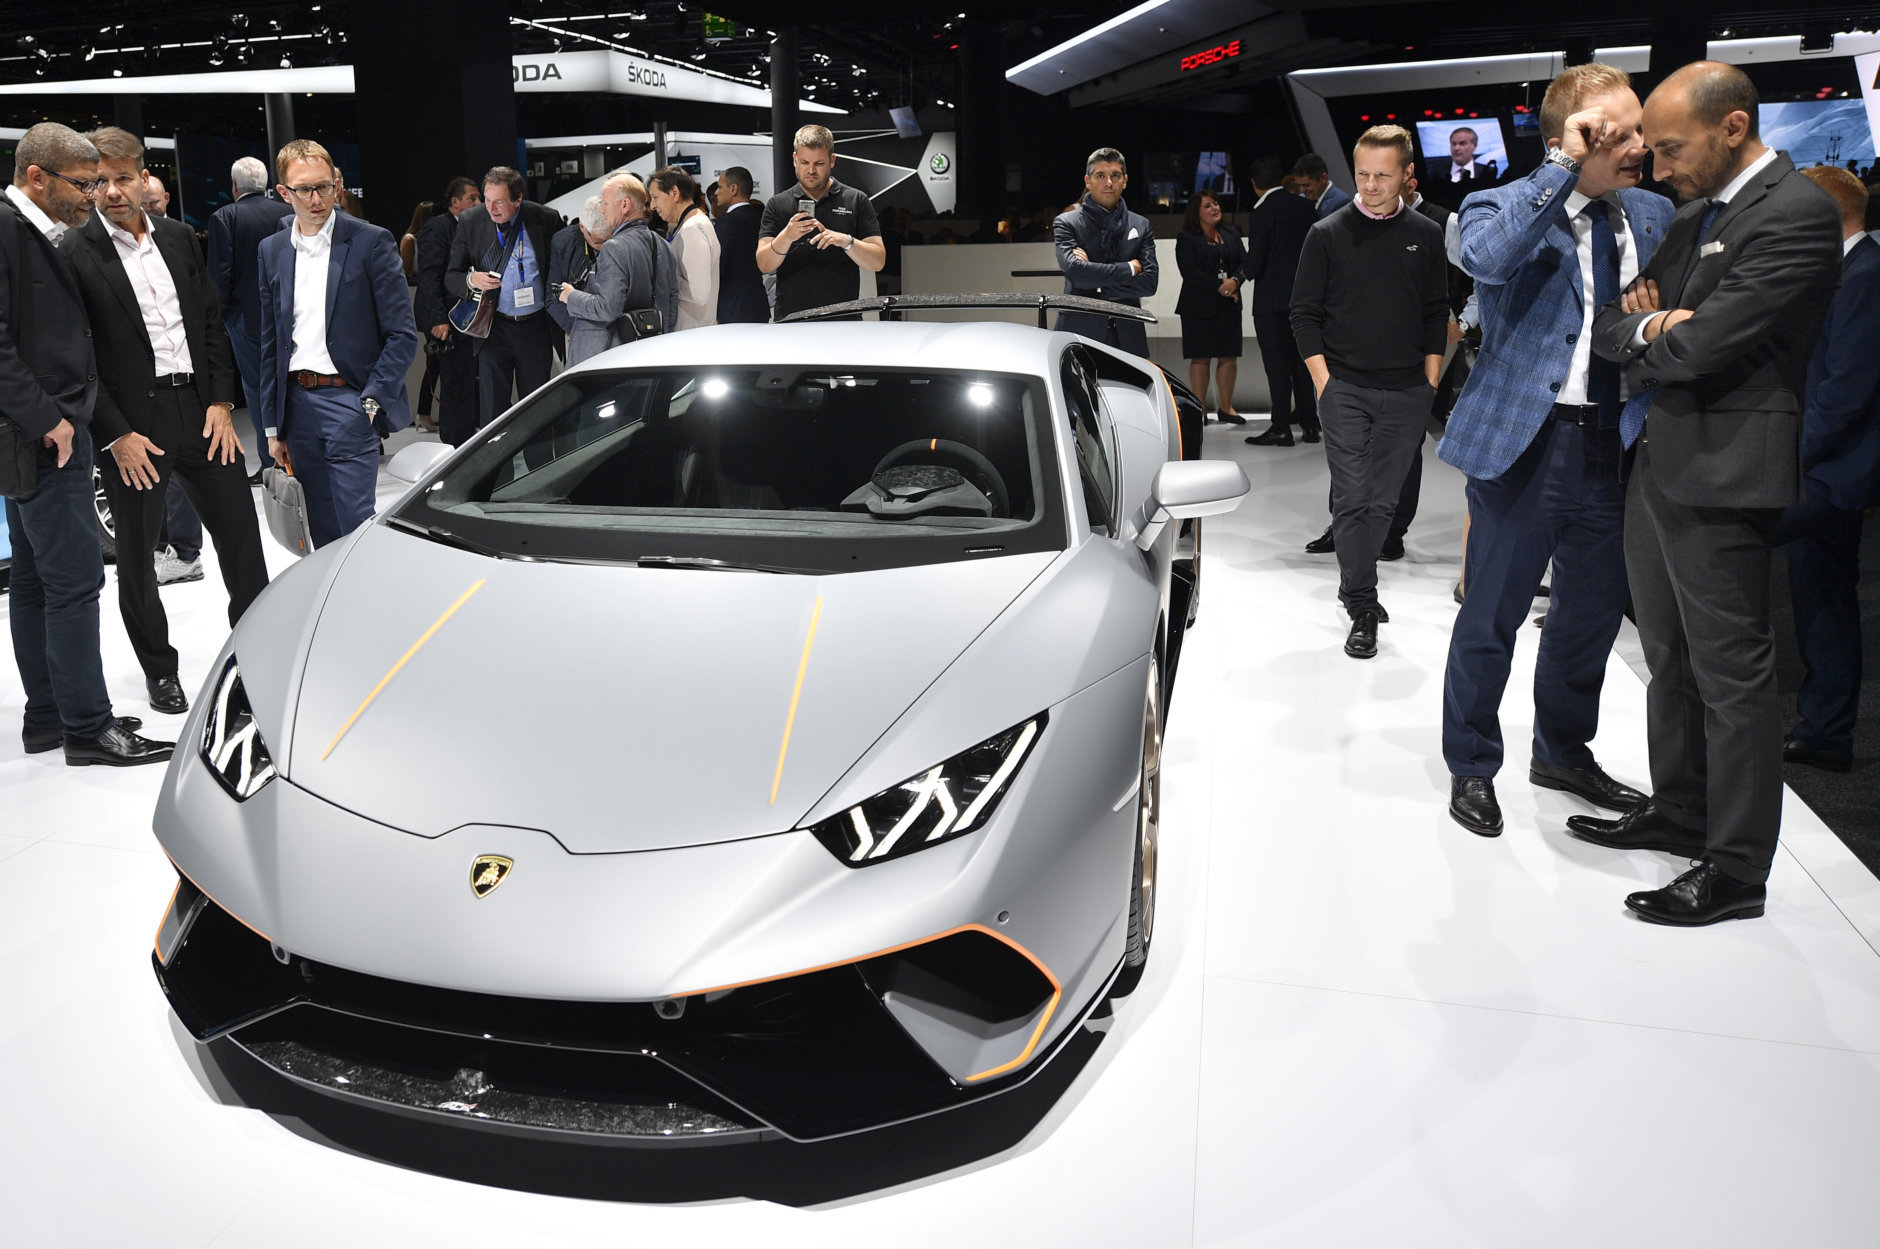 Visitors look at a Lamborghini Huracan Performante on the first media day of the International Frankfurt Motor Show IAA in Frankfurt, Germany, Tuesday, Sept. 12, 2017, which runs through Sept. 24, 2017. (AP Photo/Martin Meissner)